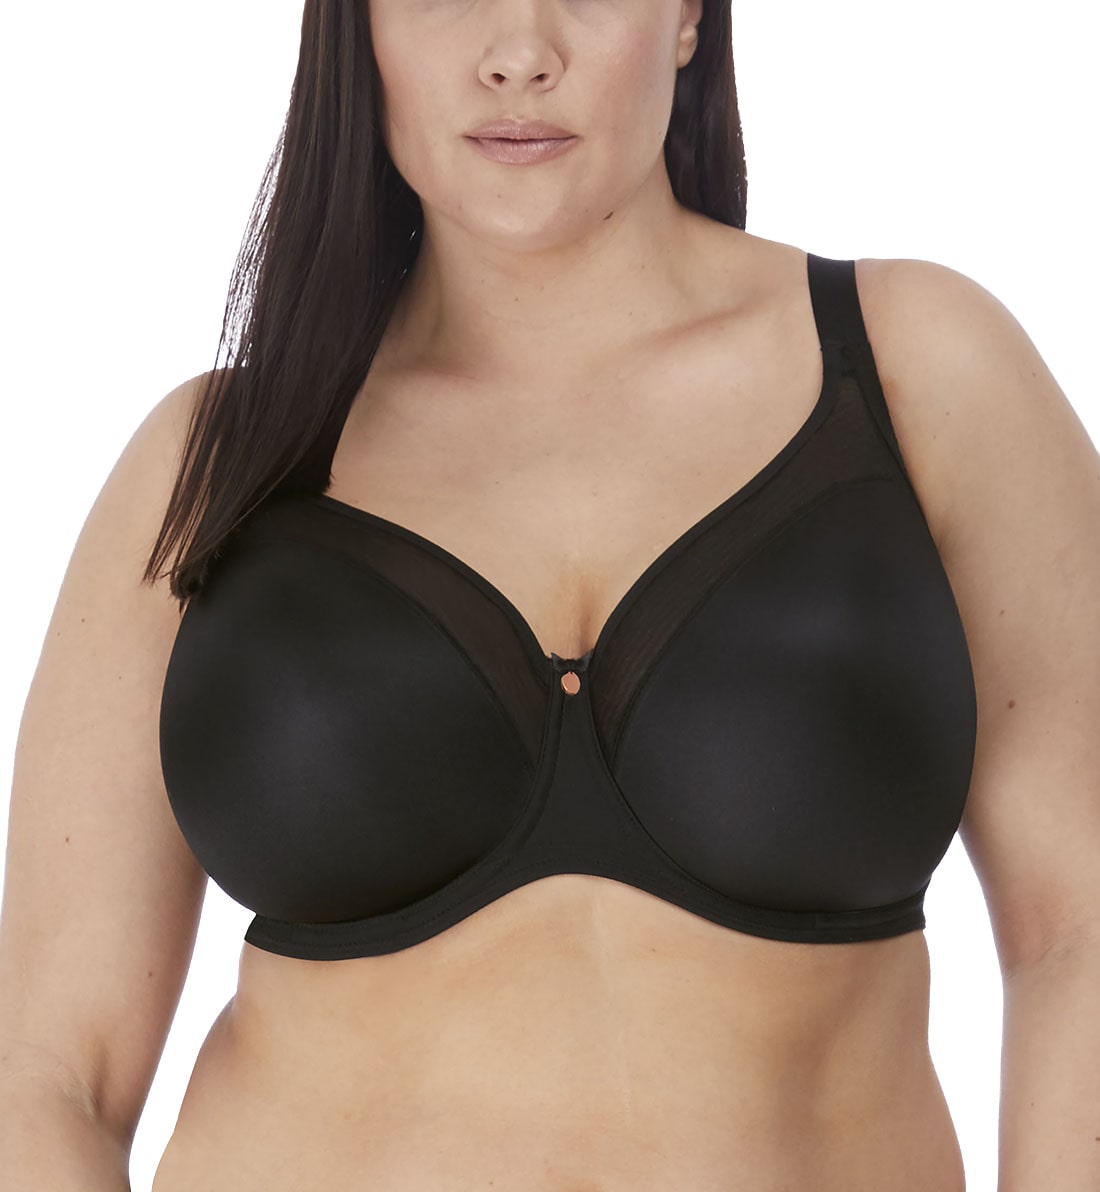 Elomi Smooth Unlined Underwire Molded Bra (4301),32GG,Black - Black,32GG